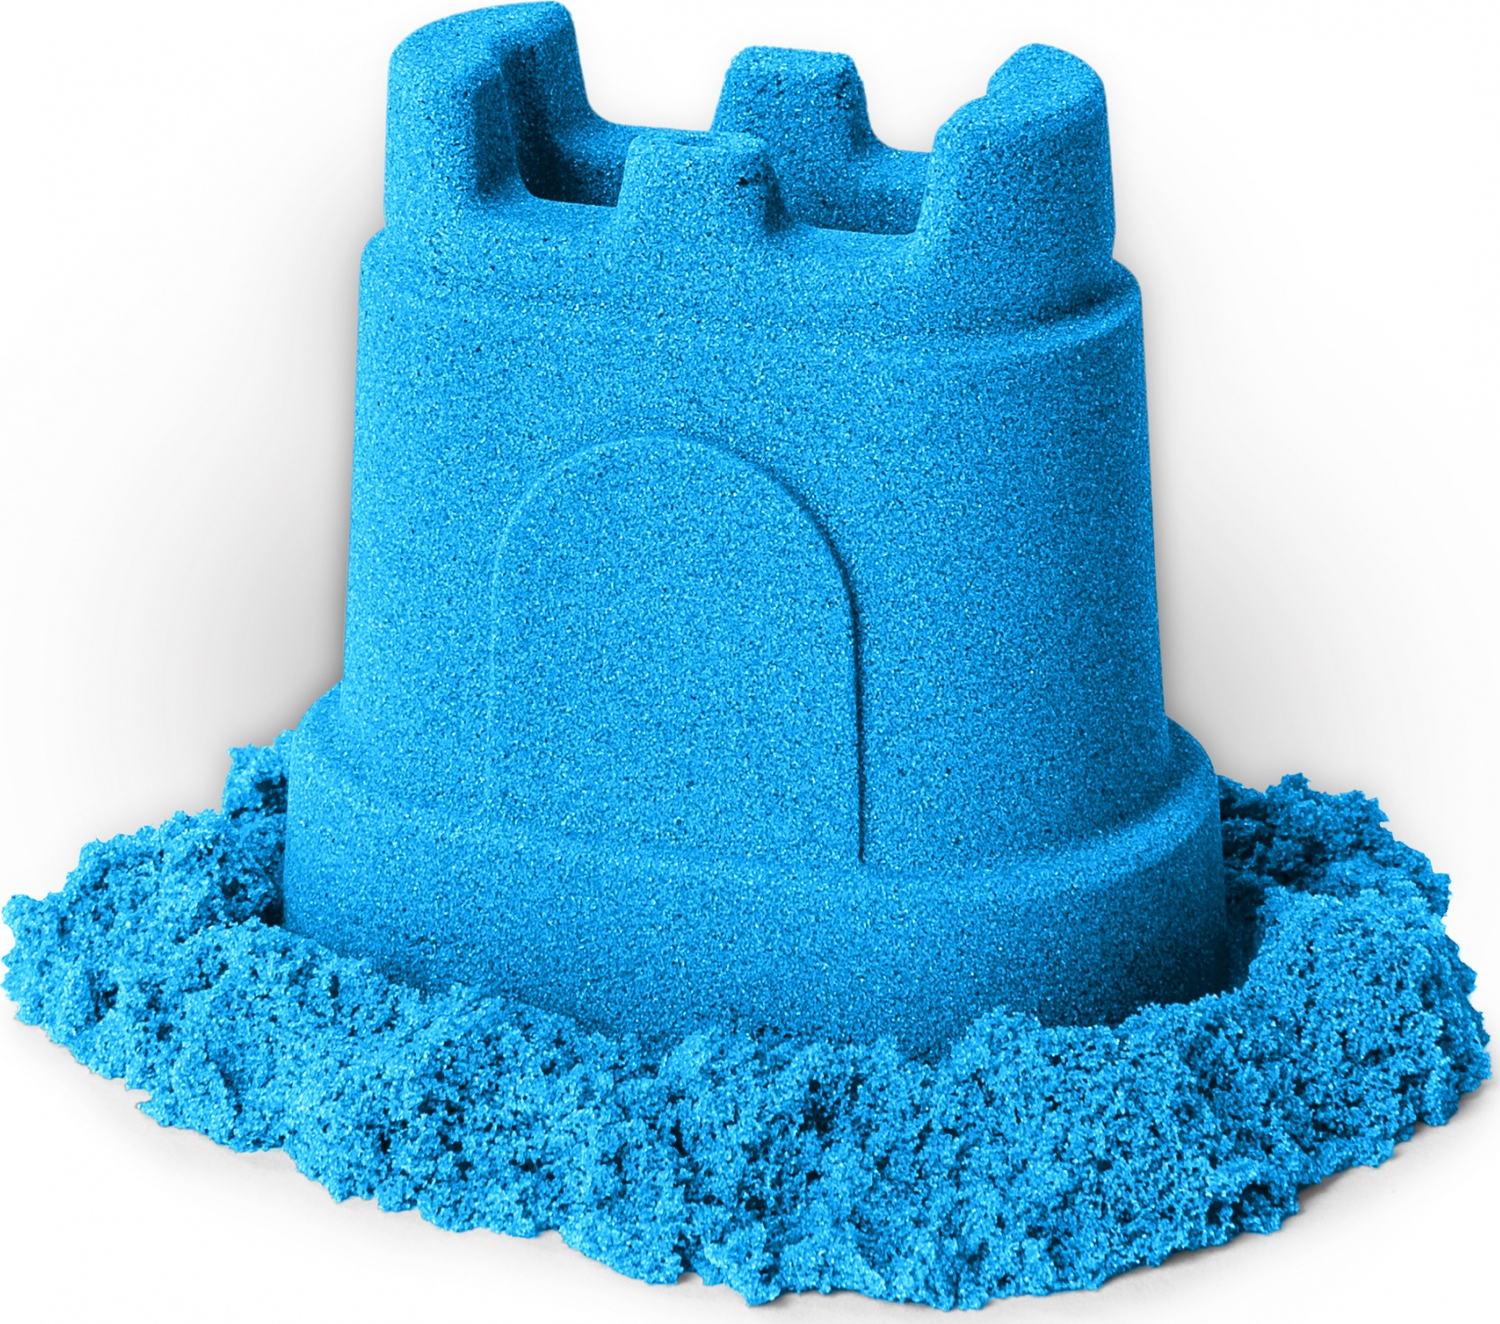 Kinetic Sand Single Container - Tumbleweed Toys